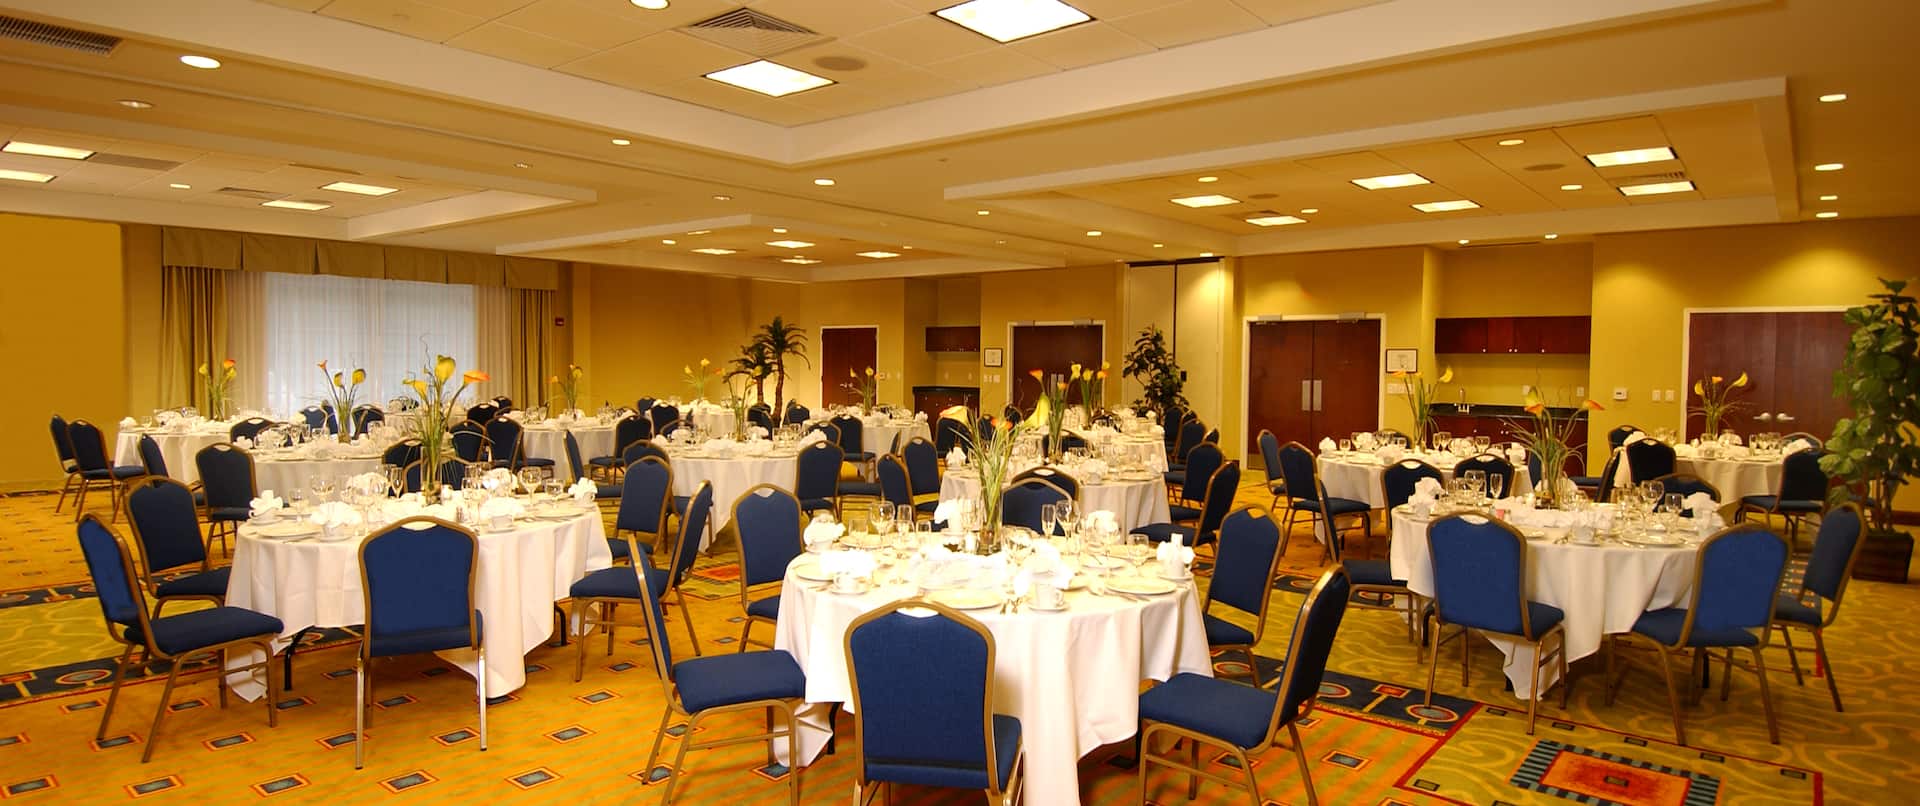 Place Settings and White Linens on Round Tables With Blue Chairs in Birch Cedar Room Set Up for Banquet